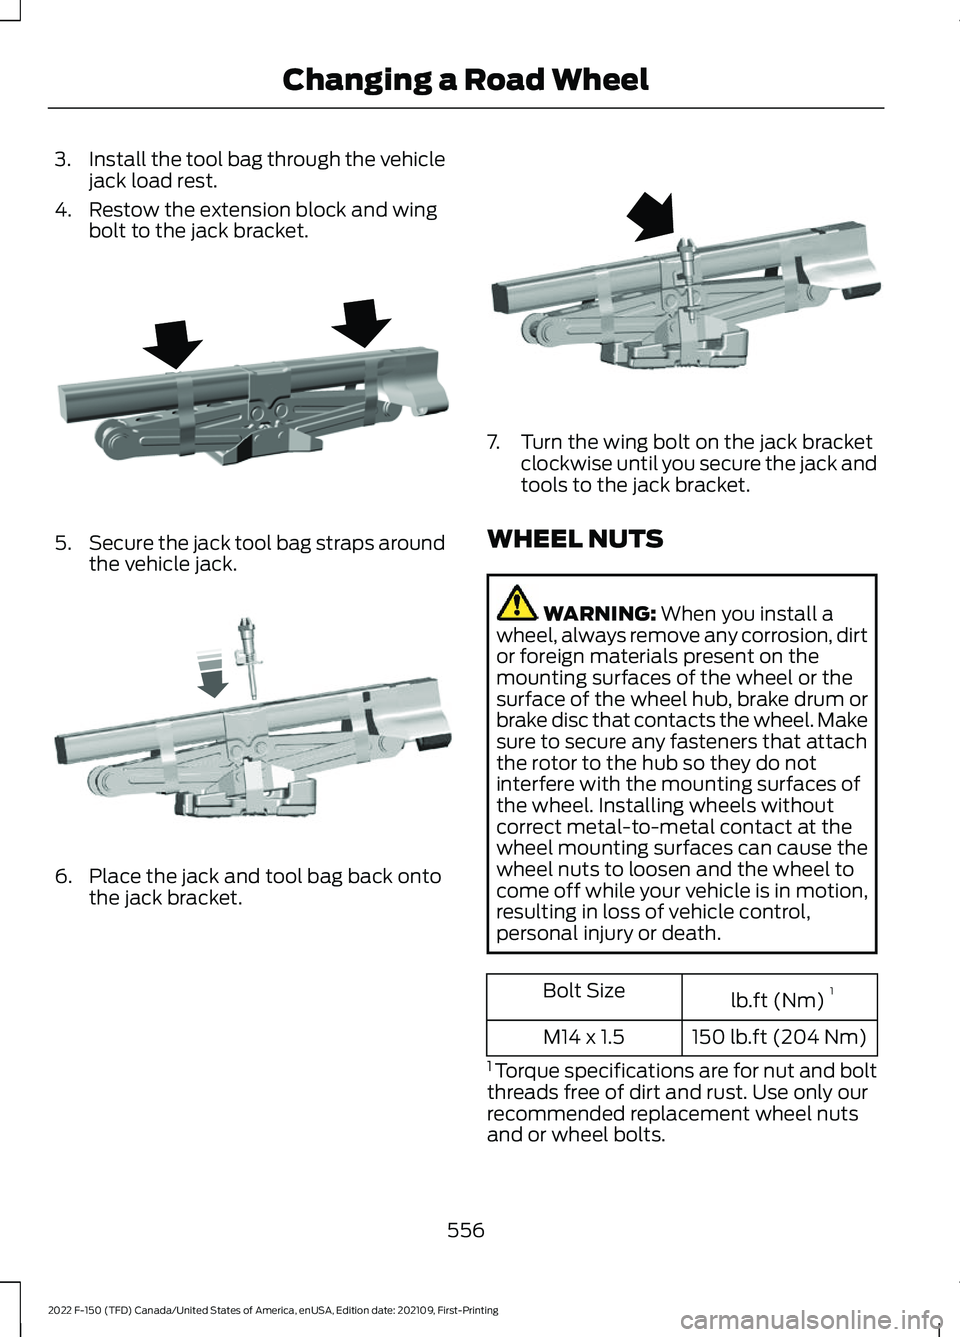 FORD F-150 2022  Owners Manual 3.
Install the tool bag through the vehicle
jack load rest.
4. Restow the extension block and wing bolt to the jack bracket. 5.
Secure the jack tool bag straps around
the vehicle jack. 6. Place the ja